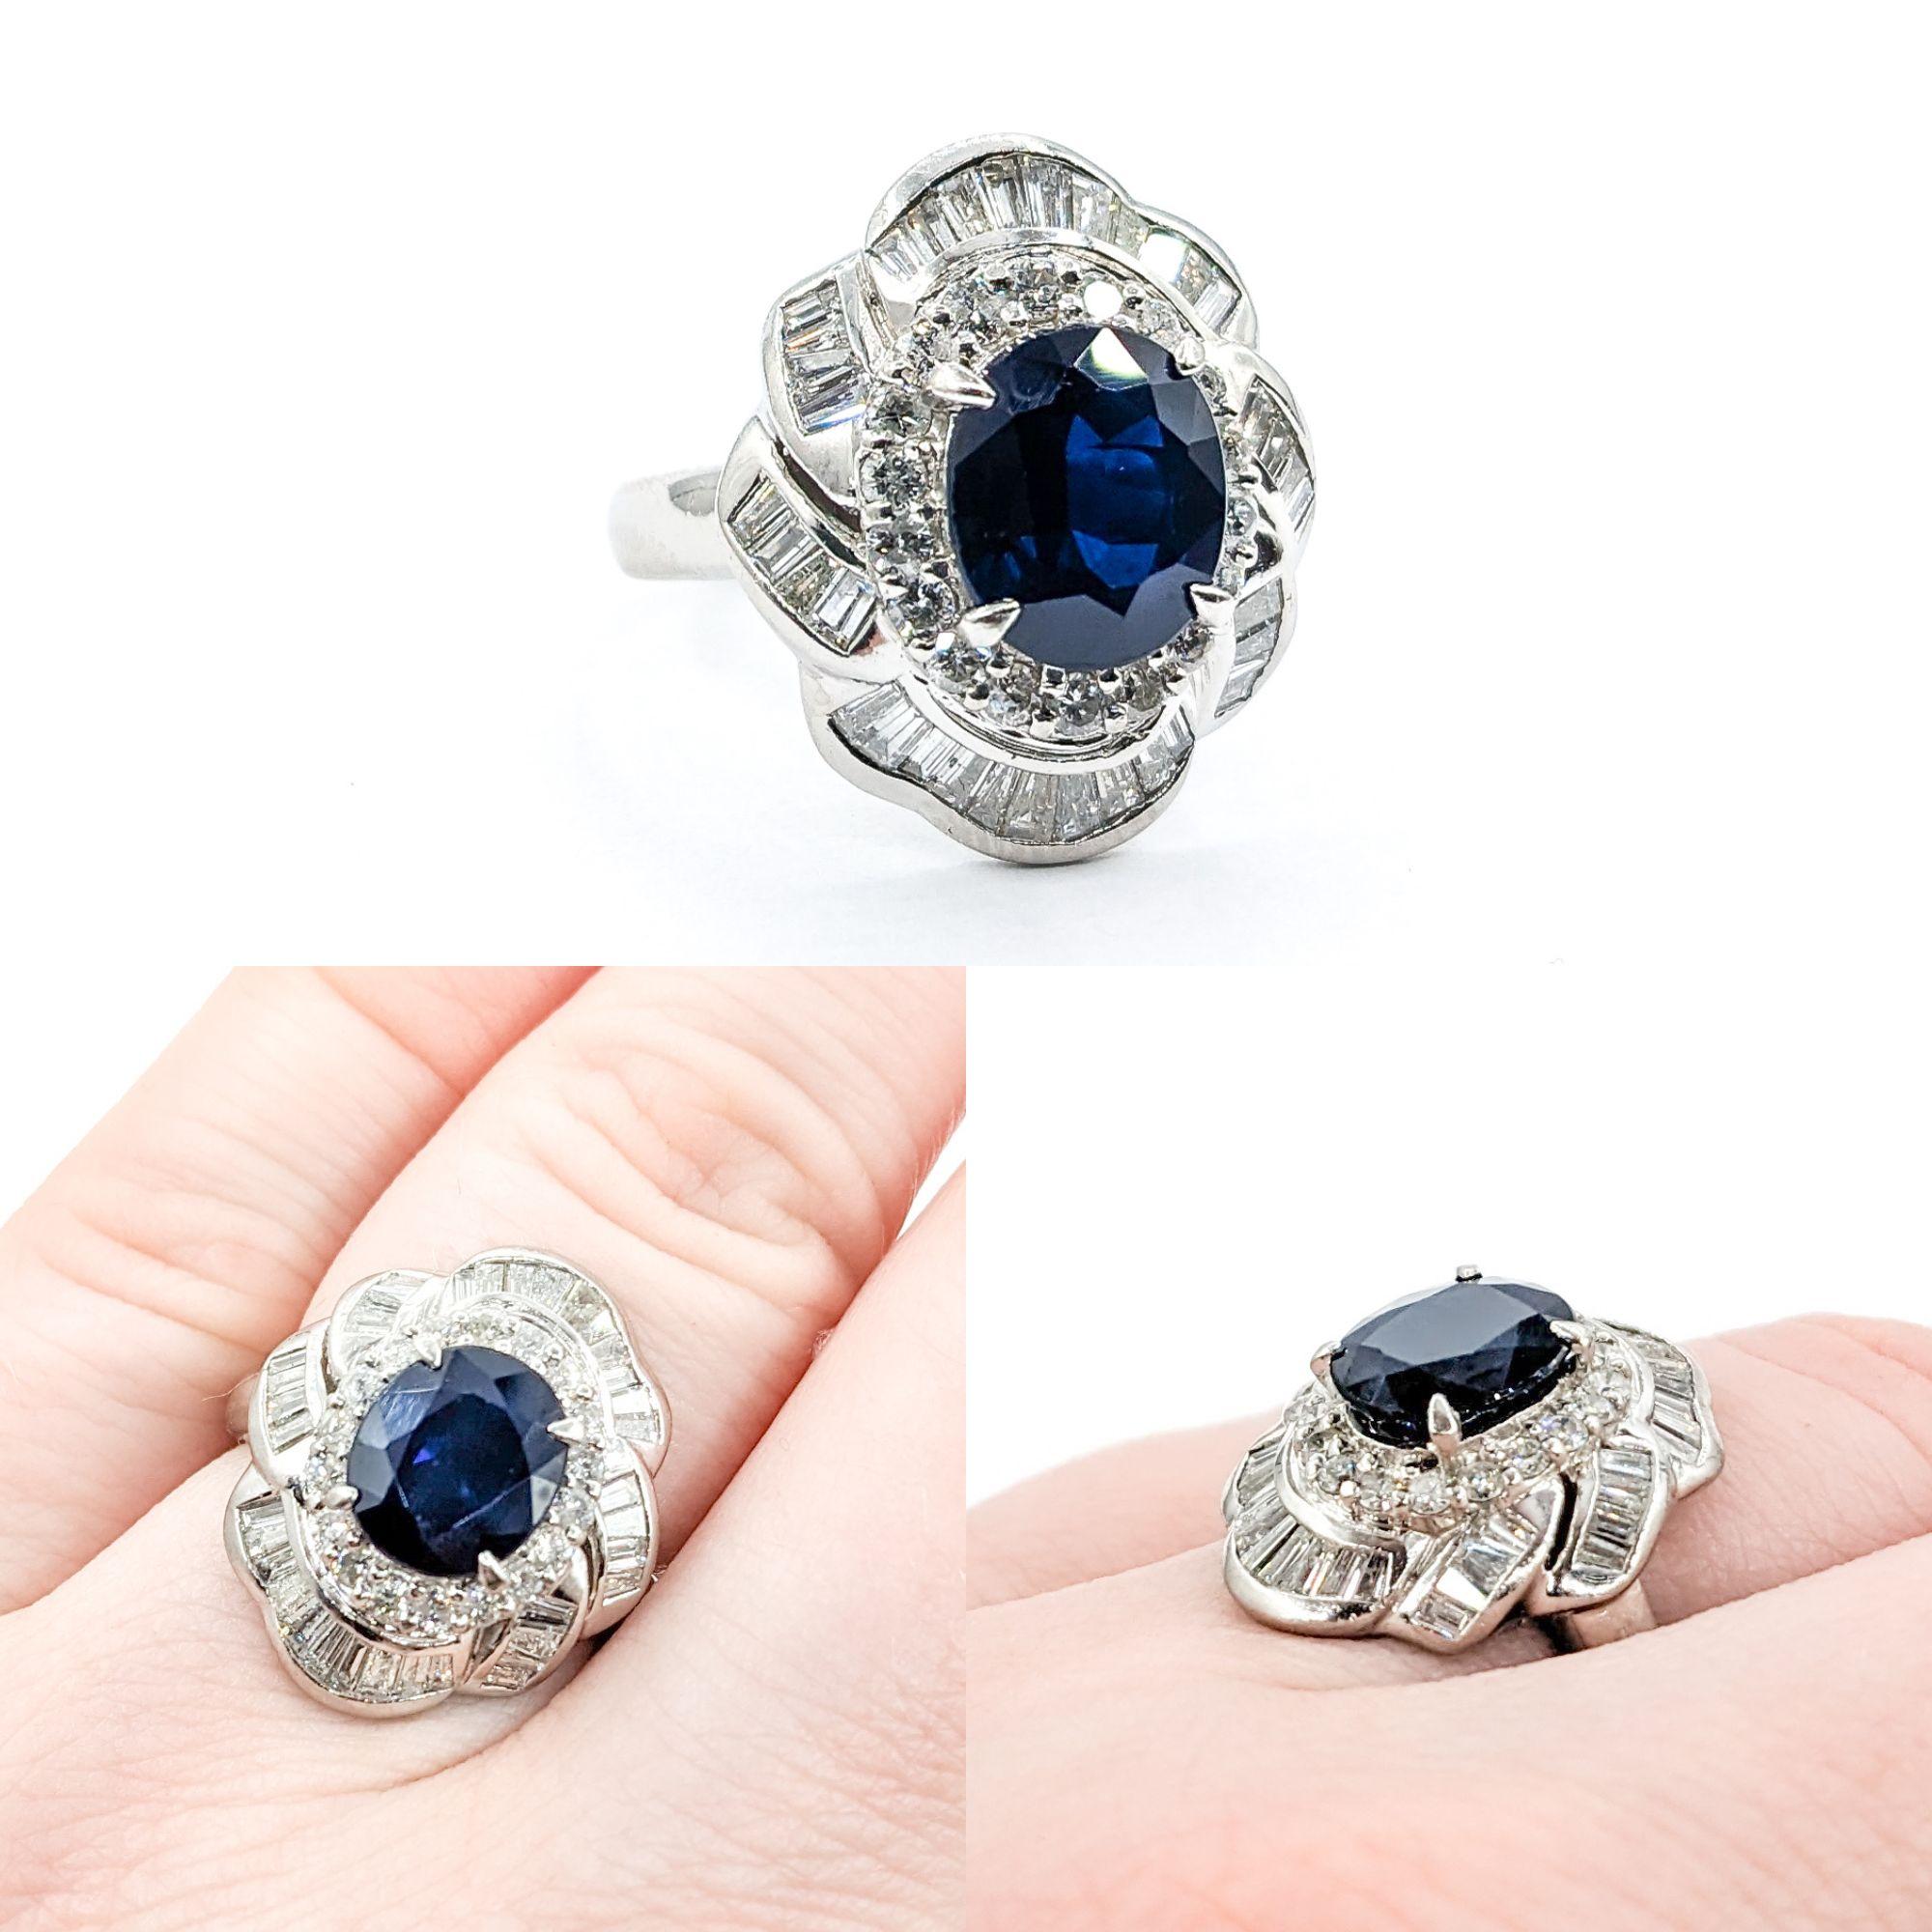 2.83ct Sapphire & 1.21ctw Diamond Halo Cocktail Ring In Platinum

Showcasing an exquisite Sapphire Ring crafted in 900 Platinum, this masterpiece features a stunning 2.83ct Sapphire at its heart, surrounded by 1.21ctw of round & baguette diamonds,